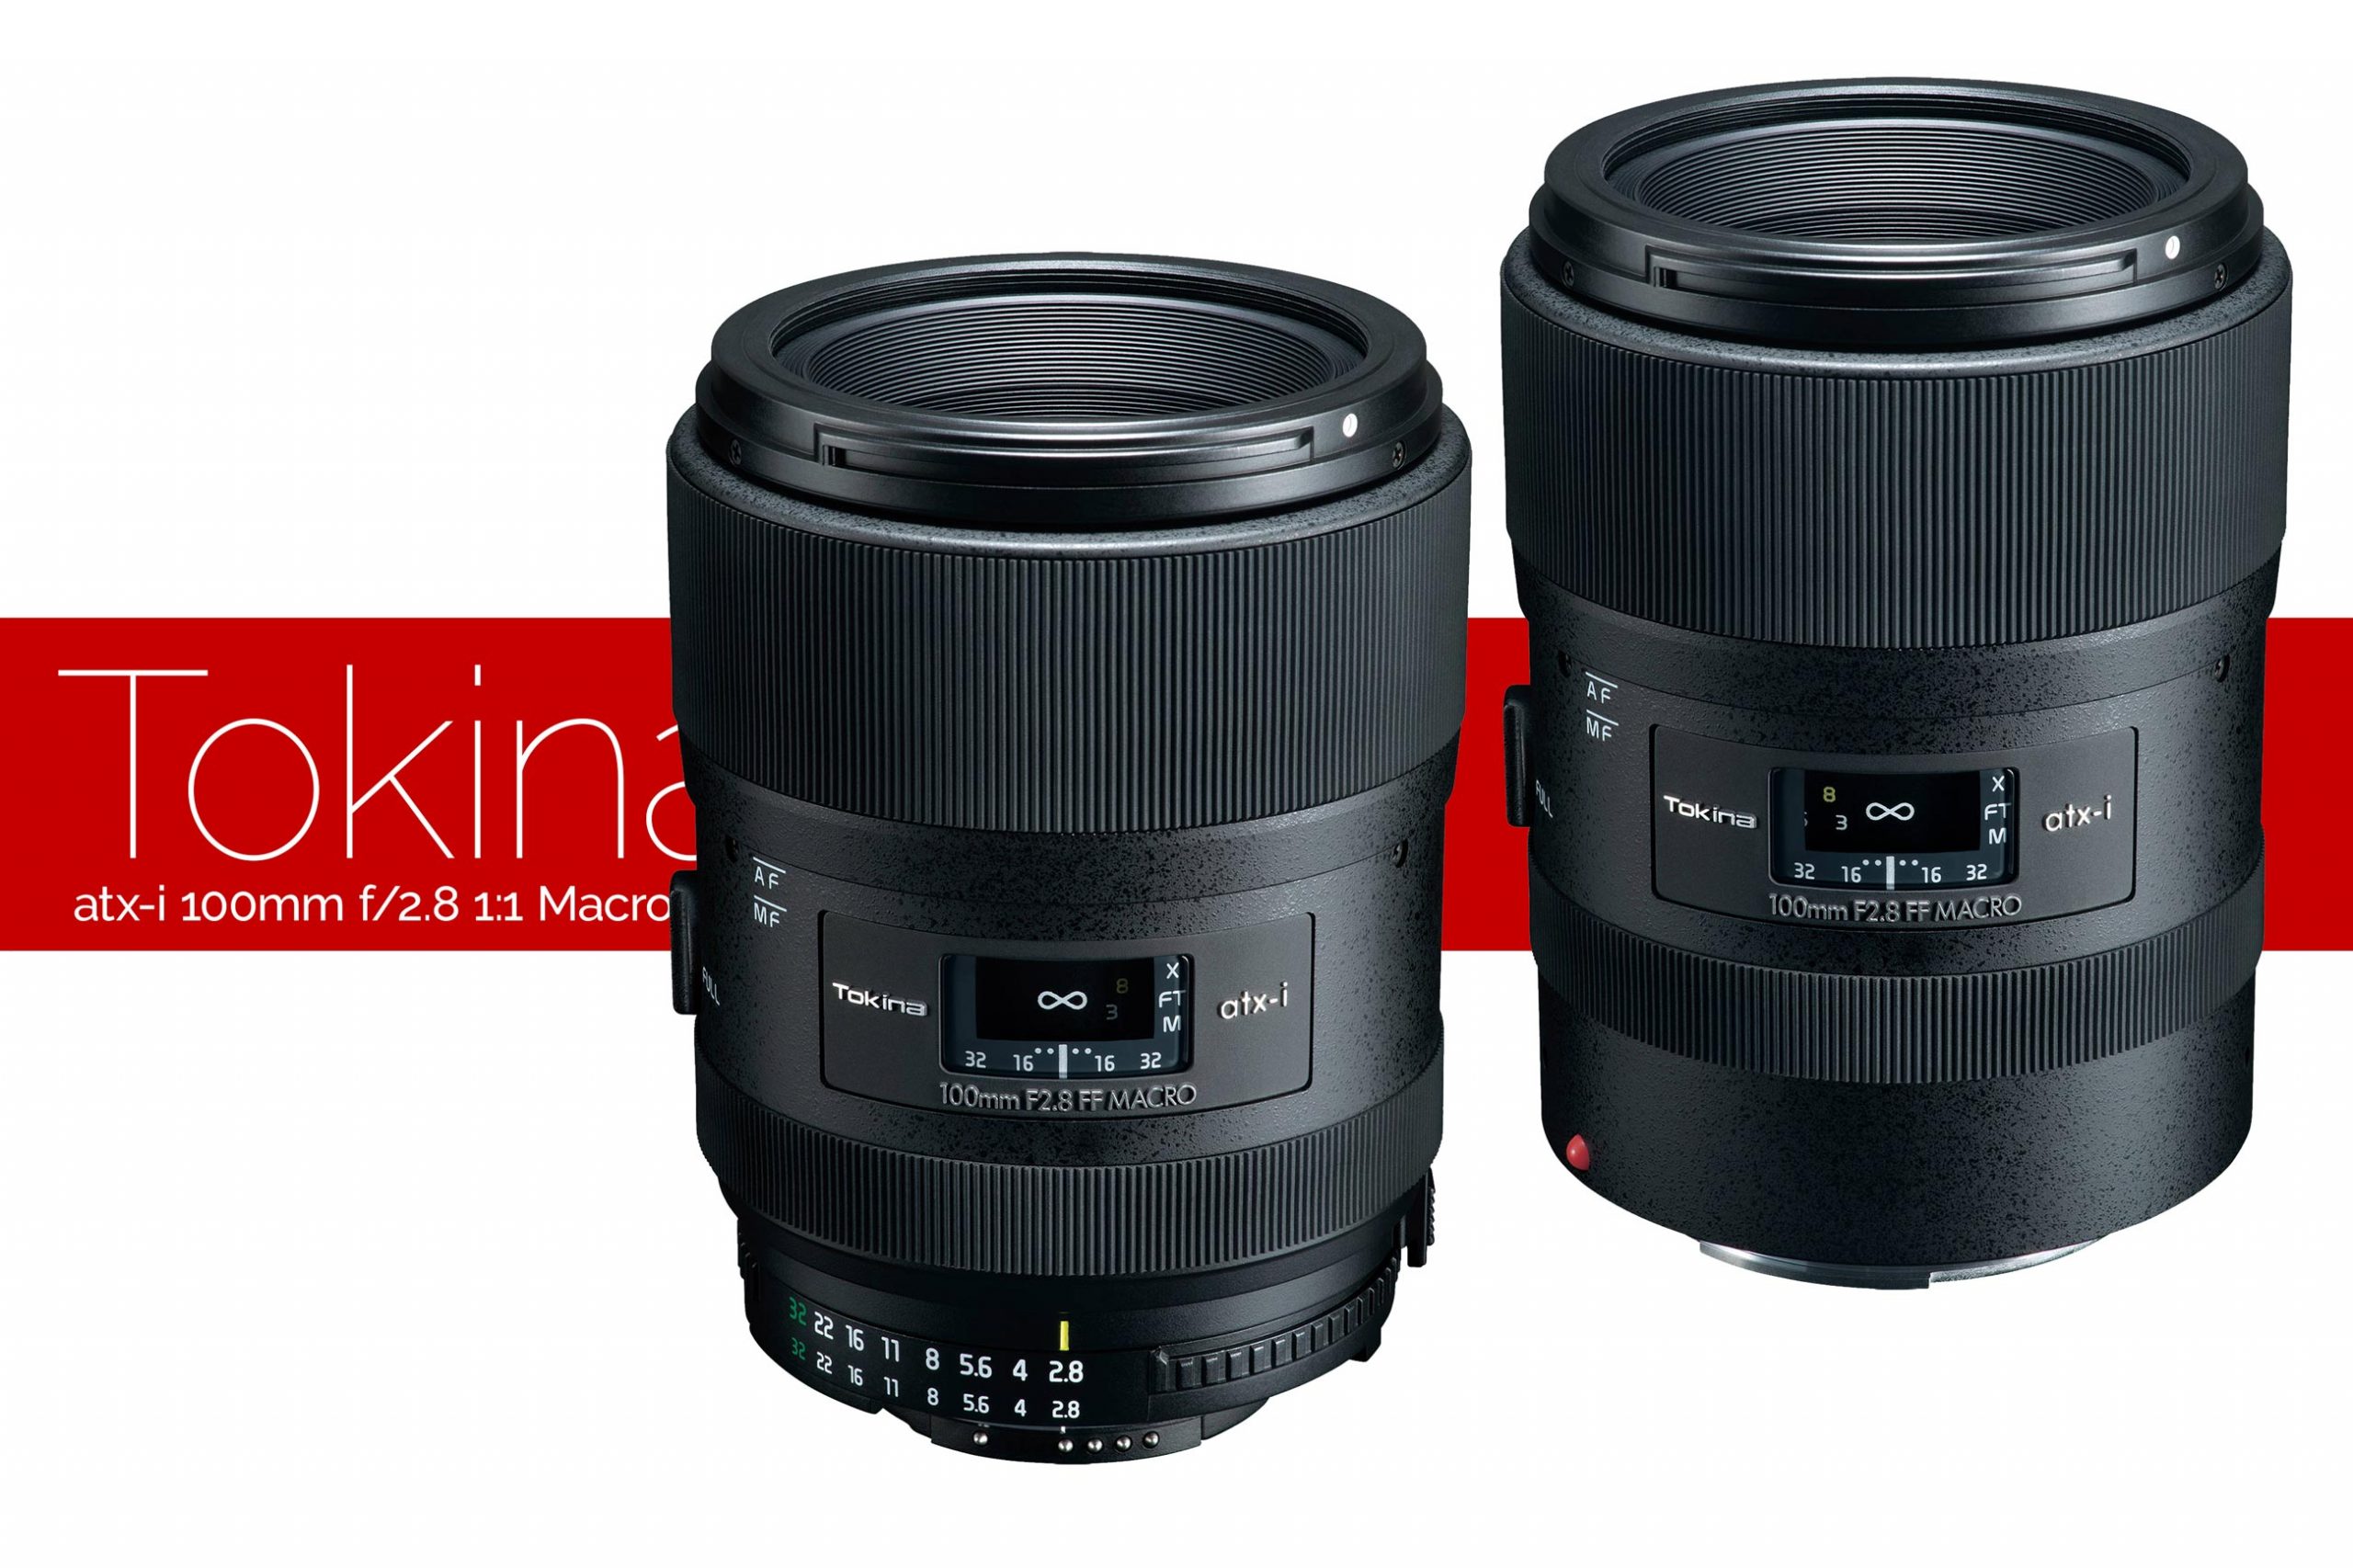 New Tokina Atx I 100mm F 2 8 Macro Lens For Canon Ef And Nikon F Light And Matter